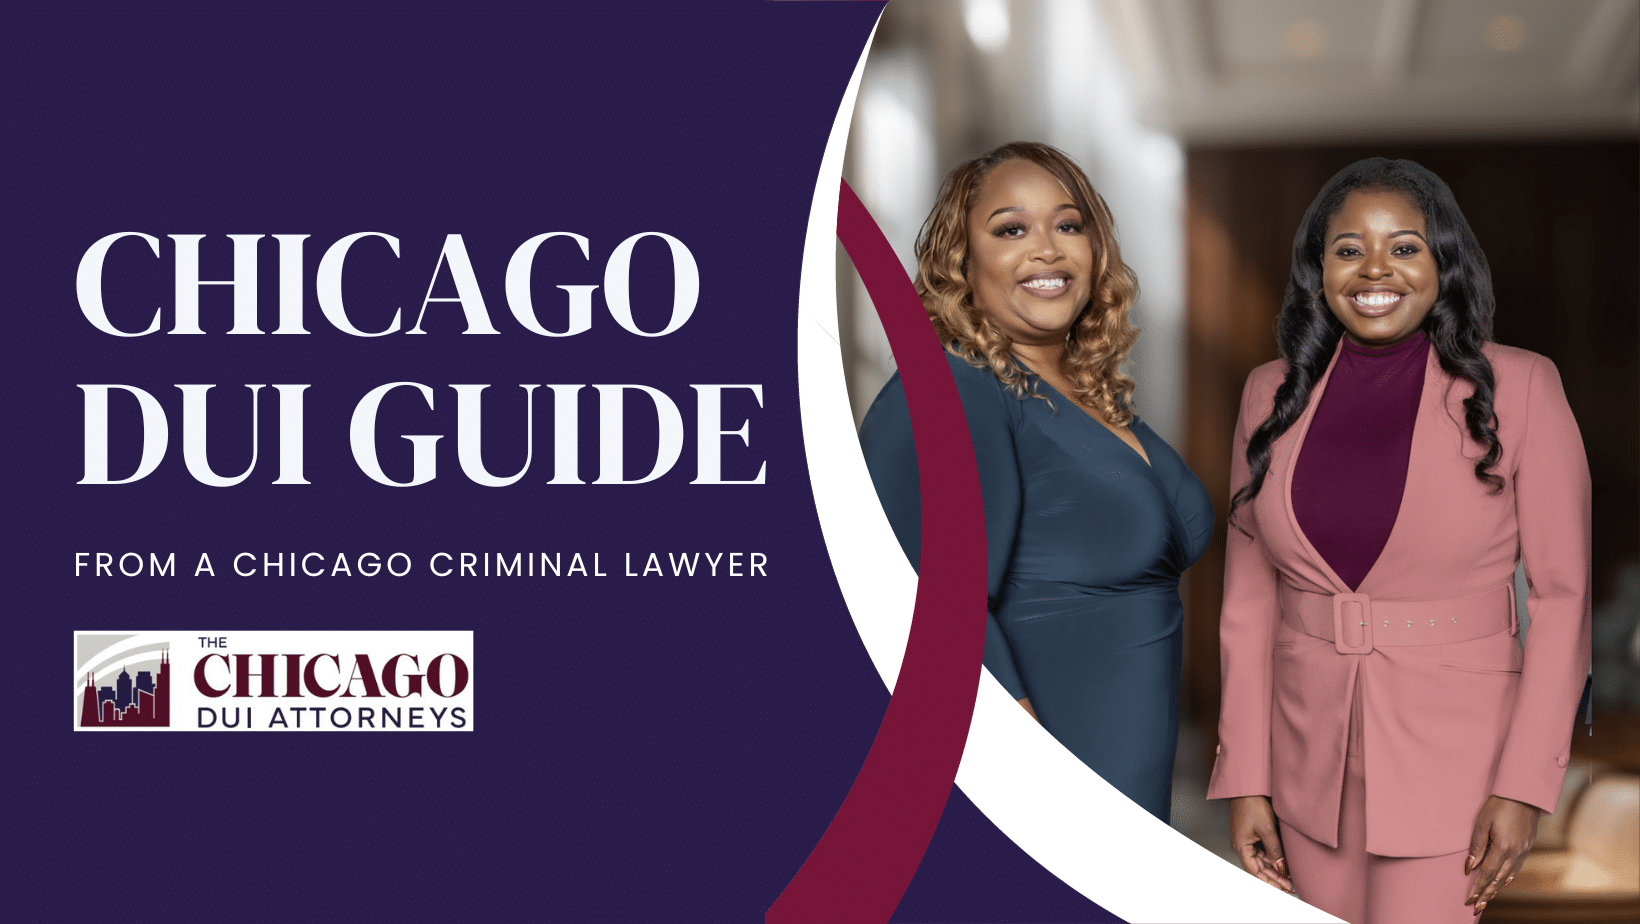 Chicago DUI Guide - The Chicago DUI Attorneys